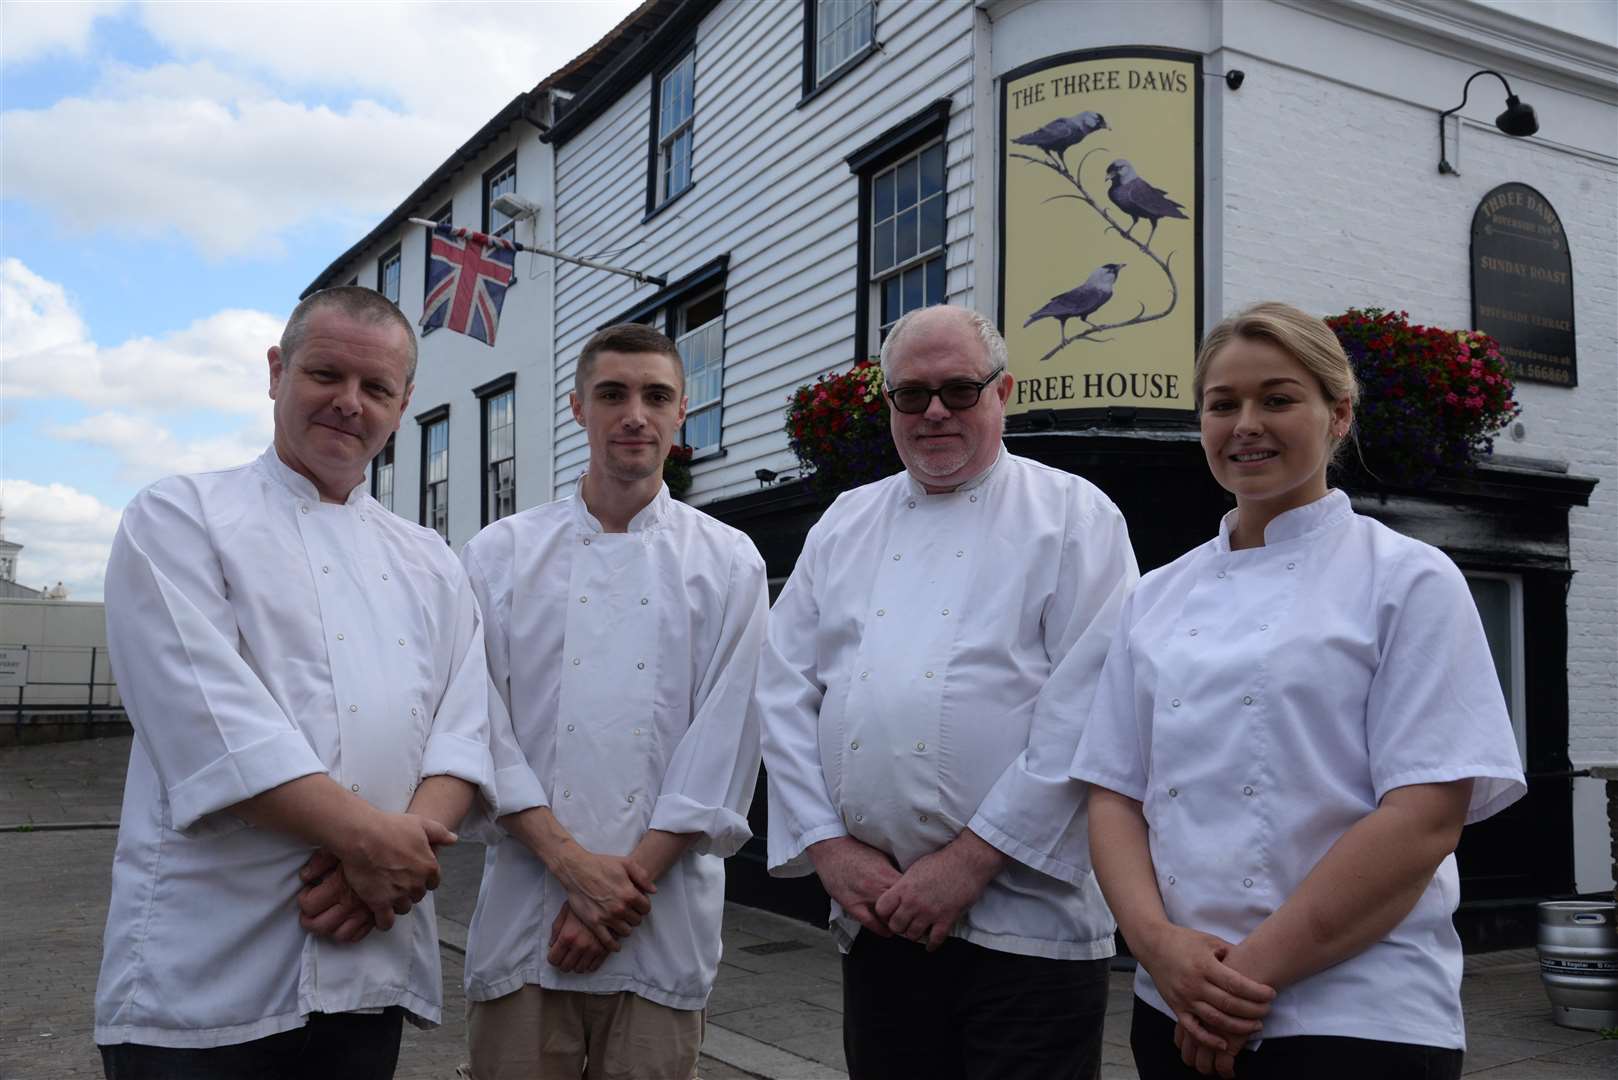 Simon Pritchard, Jacob Barber, Vince Bushell and Georgia Tall, chefs at the Three Daws, Town Pier, Gravesend who have been listed 8th in the Daily Mail for their best Sunday roasts. Picture: Chris Davey. (3711499)